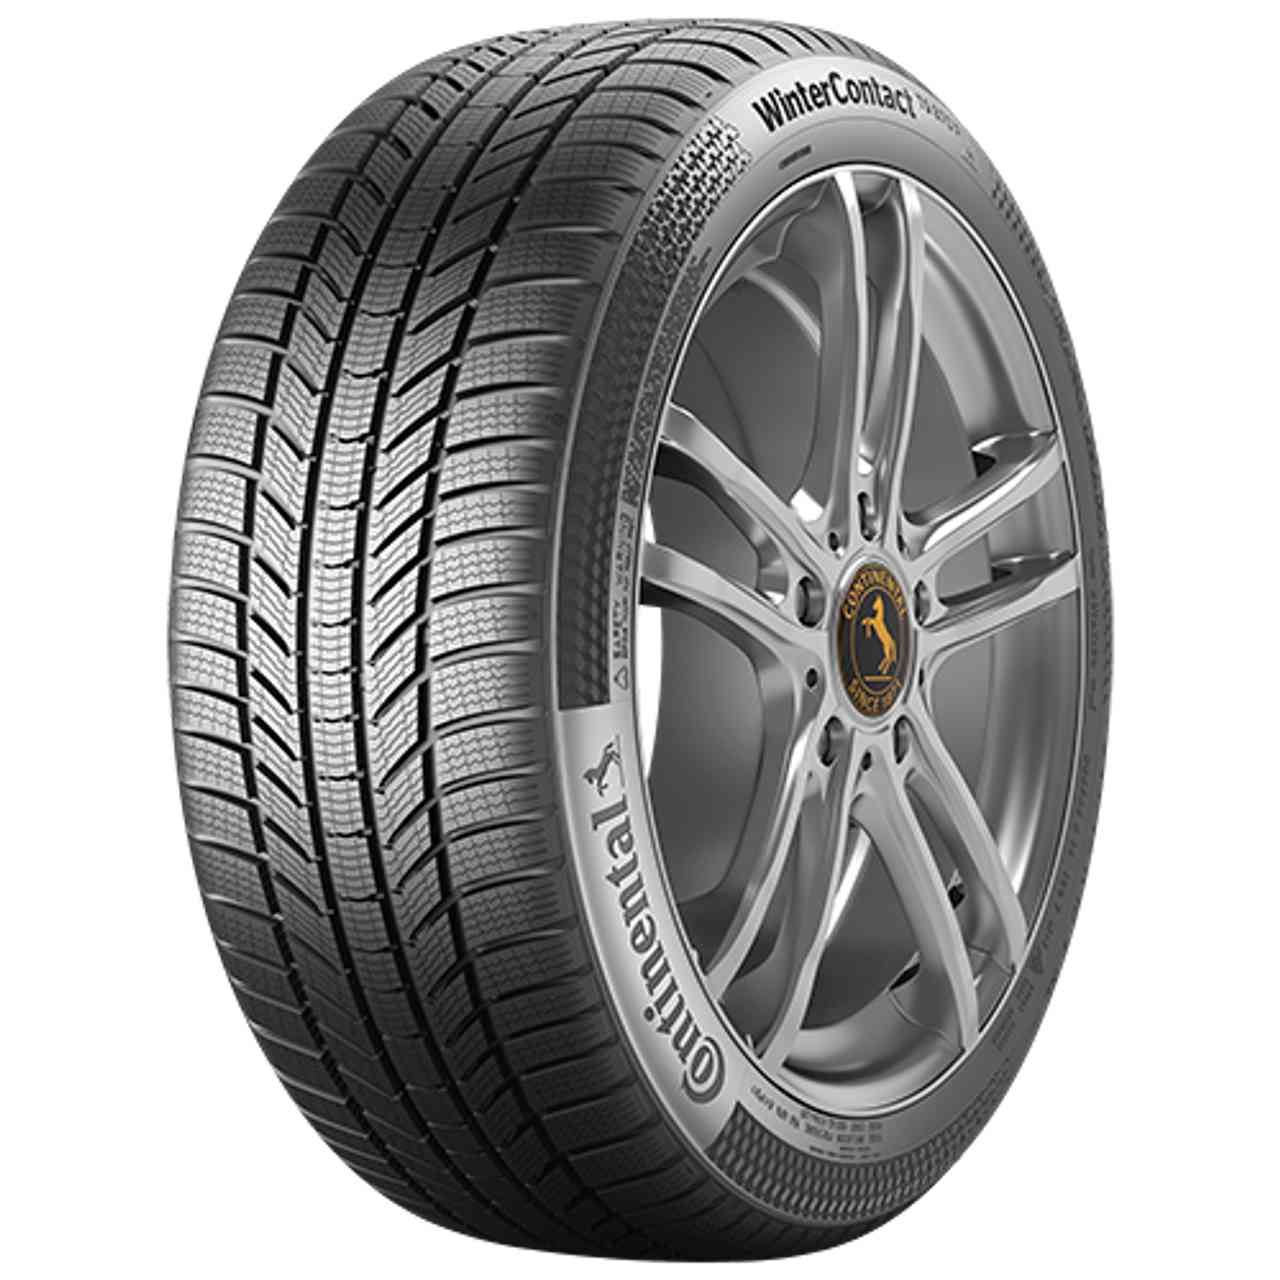 CONTINENTAL WINTERCONTACT TS 870 P (EVc) 225/45R19 96V FR BSW